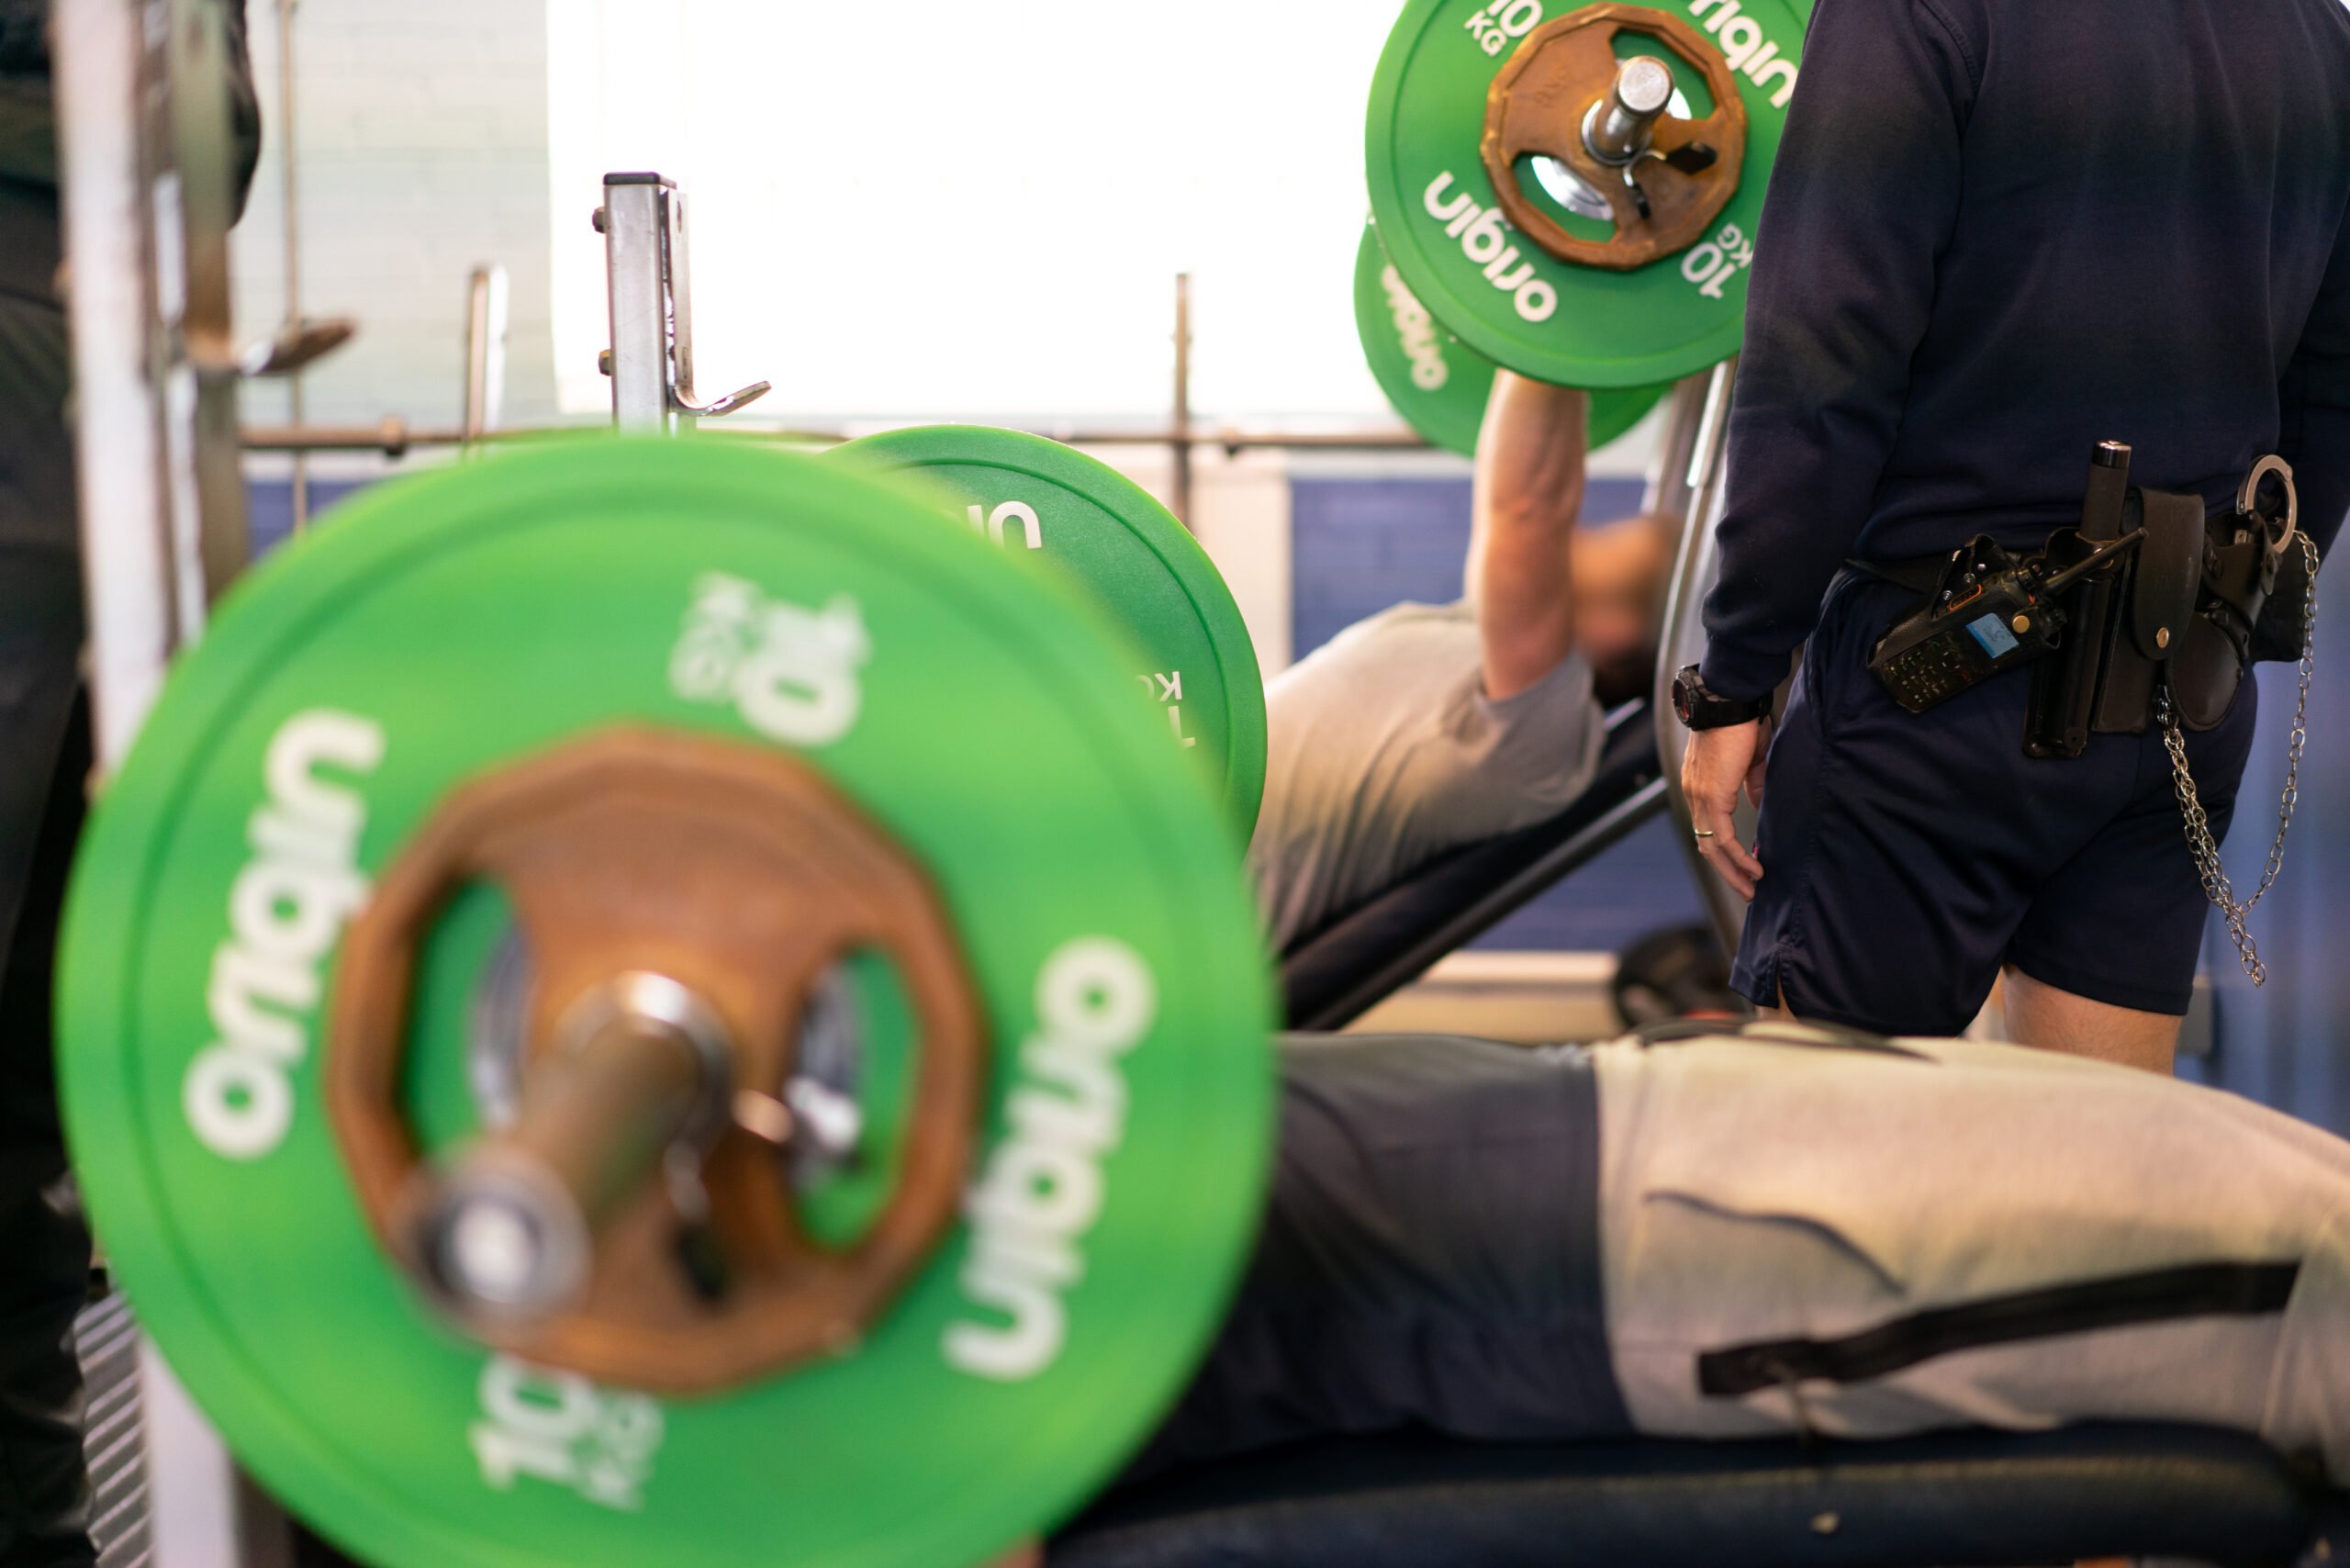 A young person lifting weights in prison. His face is obscured by the weight and we can see the prison officer in the background.